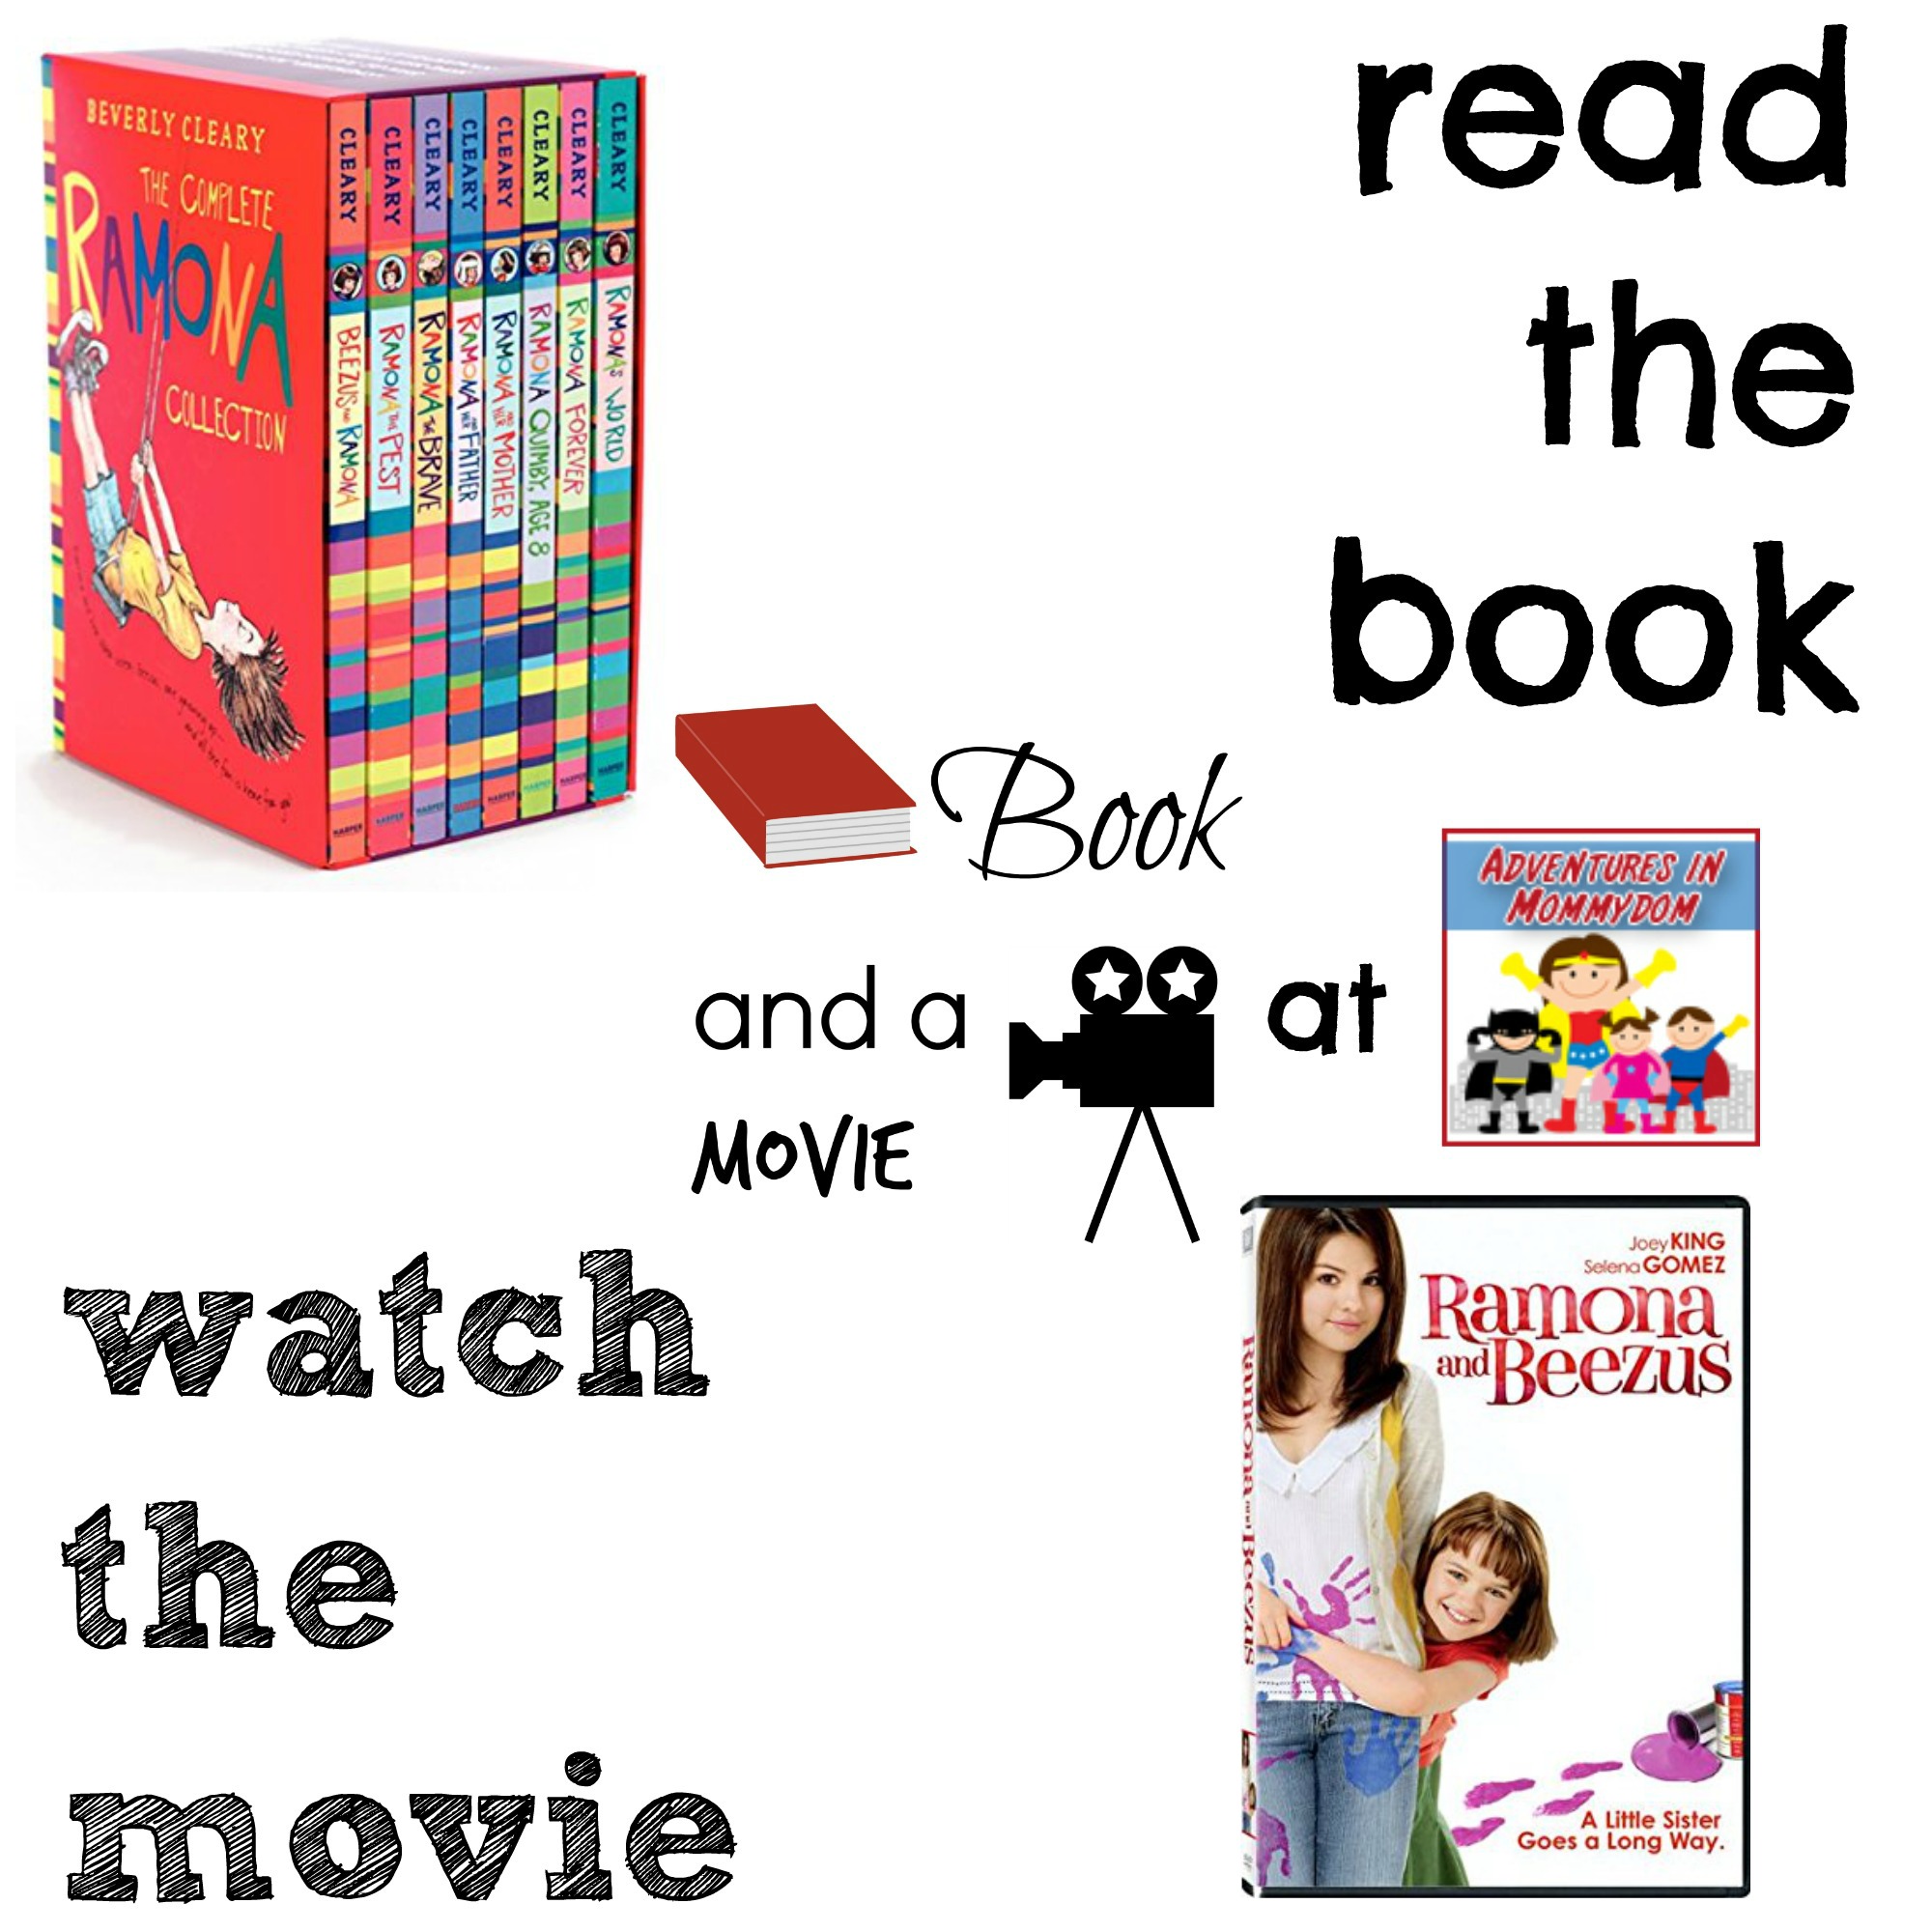 Ramona book and a movie feature